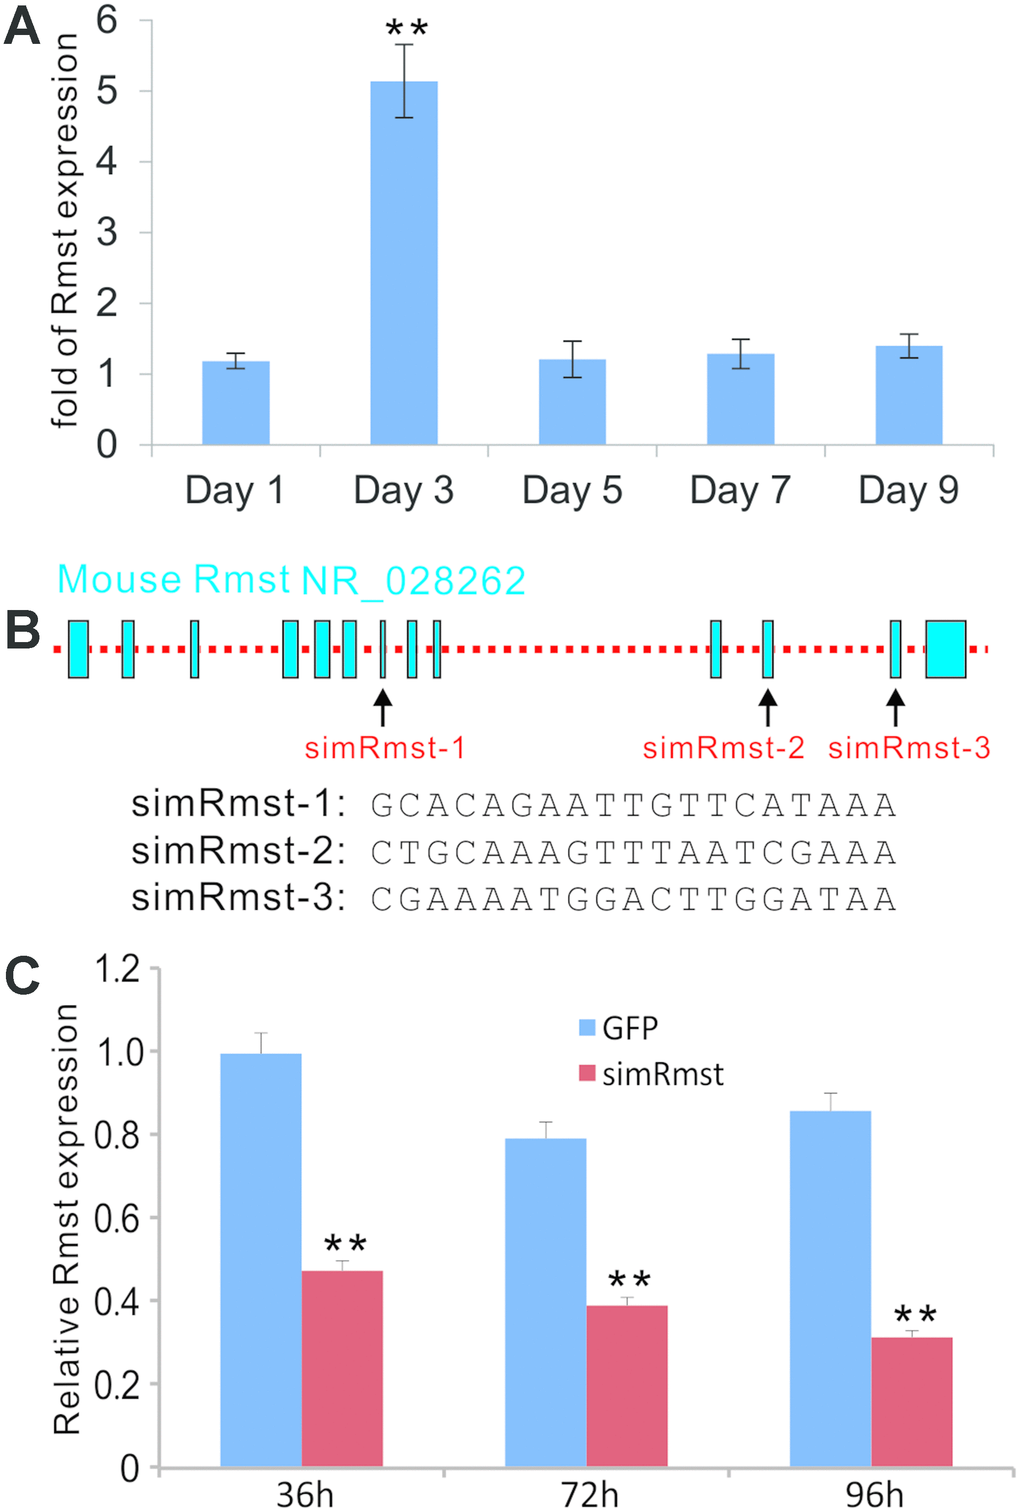 BMP9-induced expression of lncRNA Rmst and construction of adenoviral vector-mediated siRNA knockdown of Rmst expression in MSCs. (A) BMP9 induces the expression of lncRNA Rmst in MSCs. Subconfluent iMADs were infected with Ad-GFP or Ad-BMP9. At the indicated time points, total RNA was isolated and subjected to quantitative TqPCR analysis of Rmst expression. Gapdh was used as a reference gene. “**” pB) The transcriptomic arrangement of mouse lncRNA Rmst and the locations and sequences of three siRNA targeting sites are shown. (C) A recombinant adenoviral vector, called AdR-simRmst expressing the three siRNA sites, was constructed. To assess the Rmst knockdown efficiency, subconfluent iMADs were infected with AdR-simRmst or control Ad-GFP. At the indicated time point, total RNA was isolated and subjected to quantitative TqPCR analysis of Rmst expression. Gapdh was used as a reference gene. “**” p